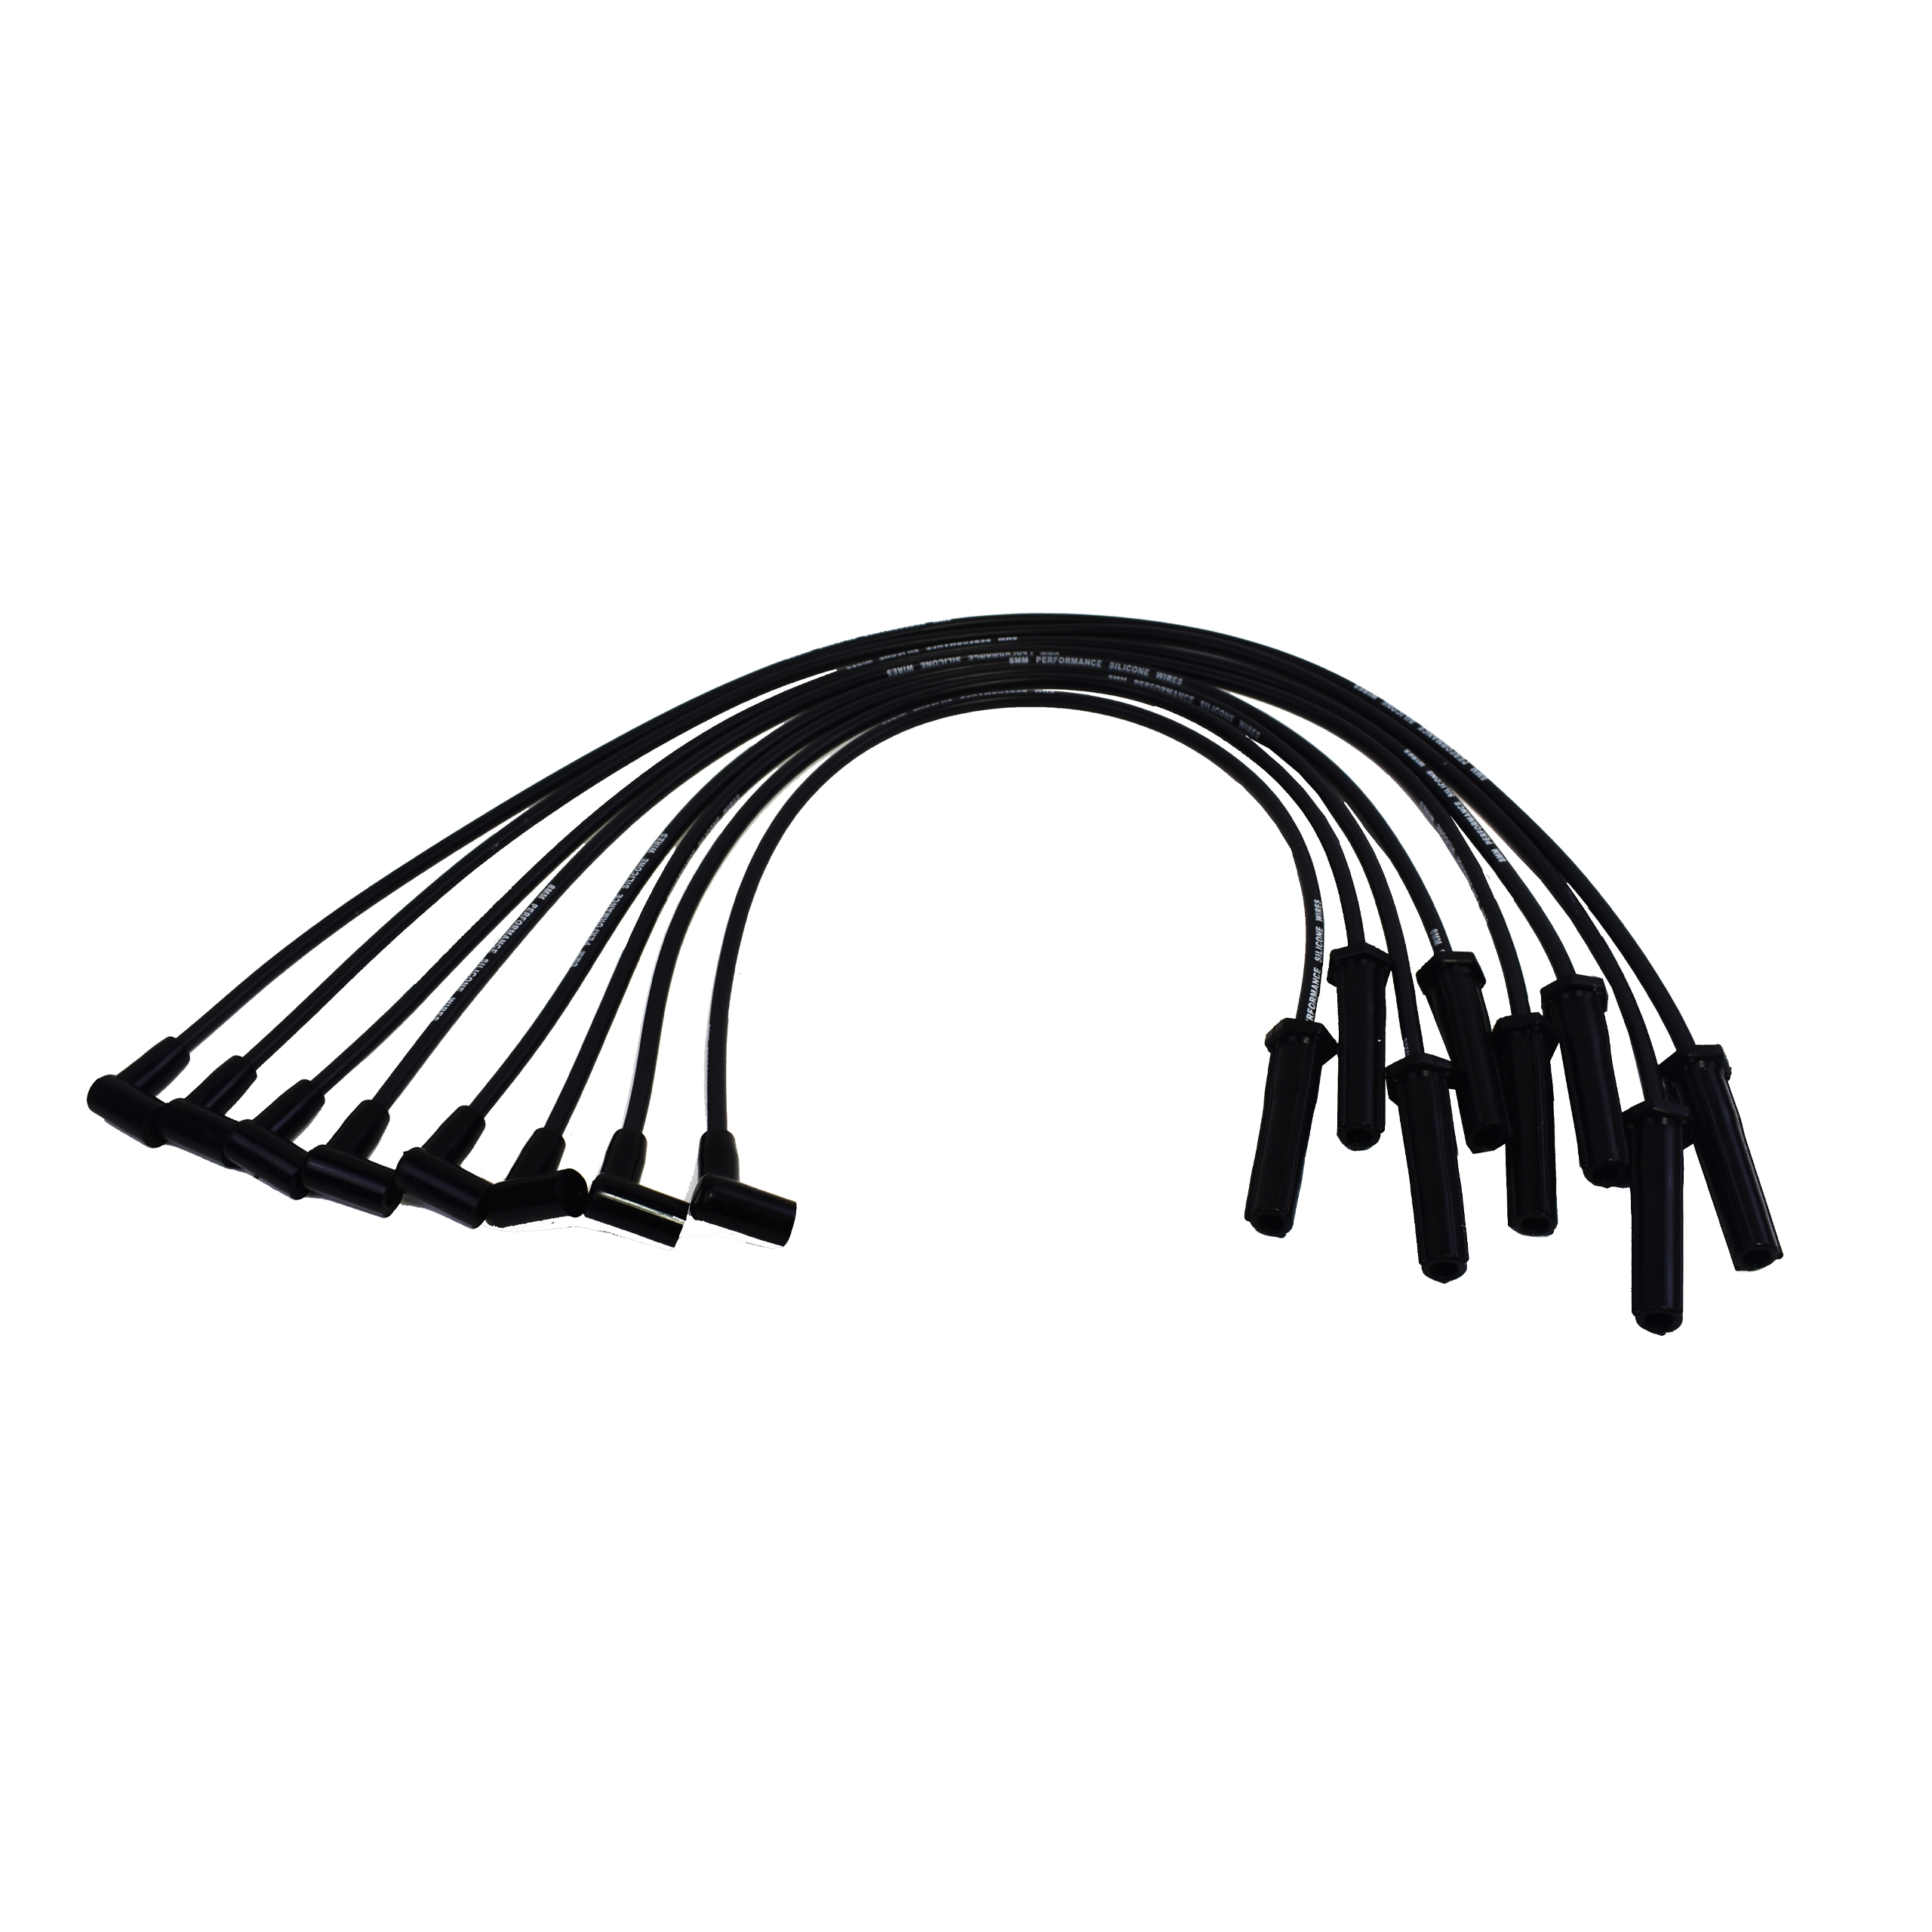 Standard Motor Products 29475 Pro Series Ignition Wire Set